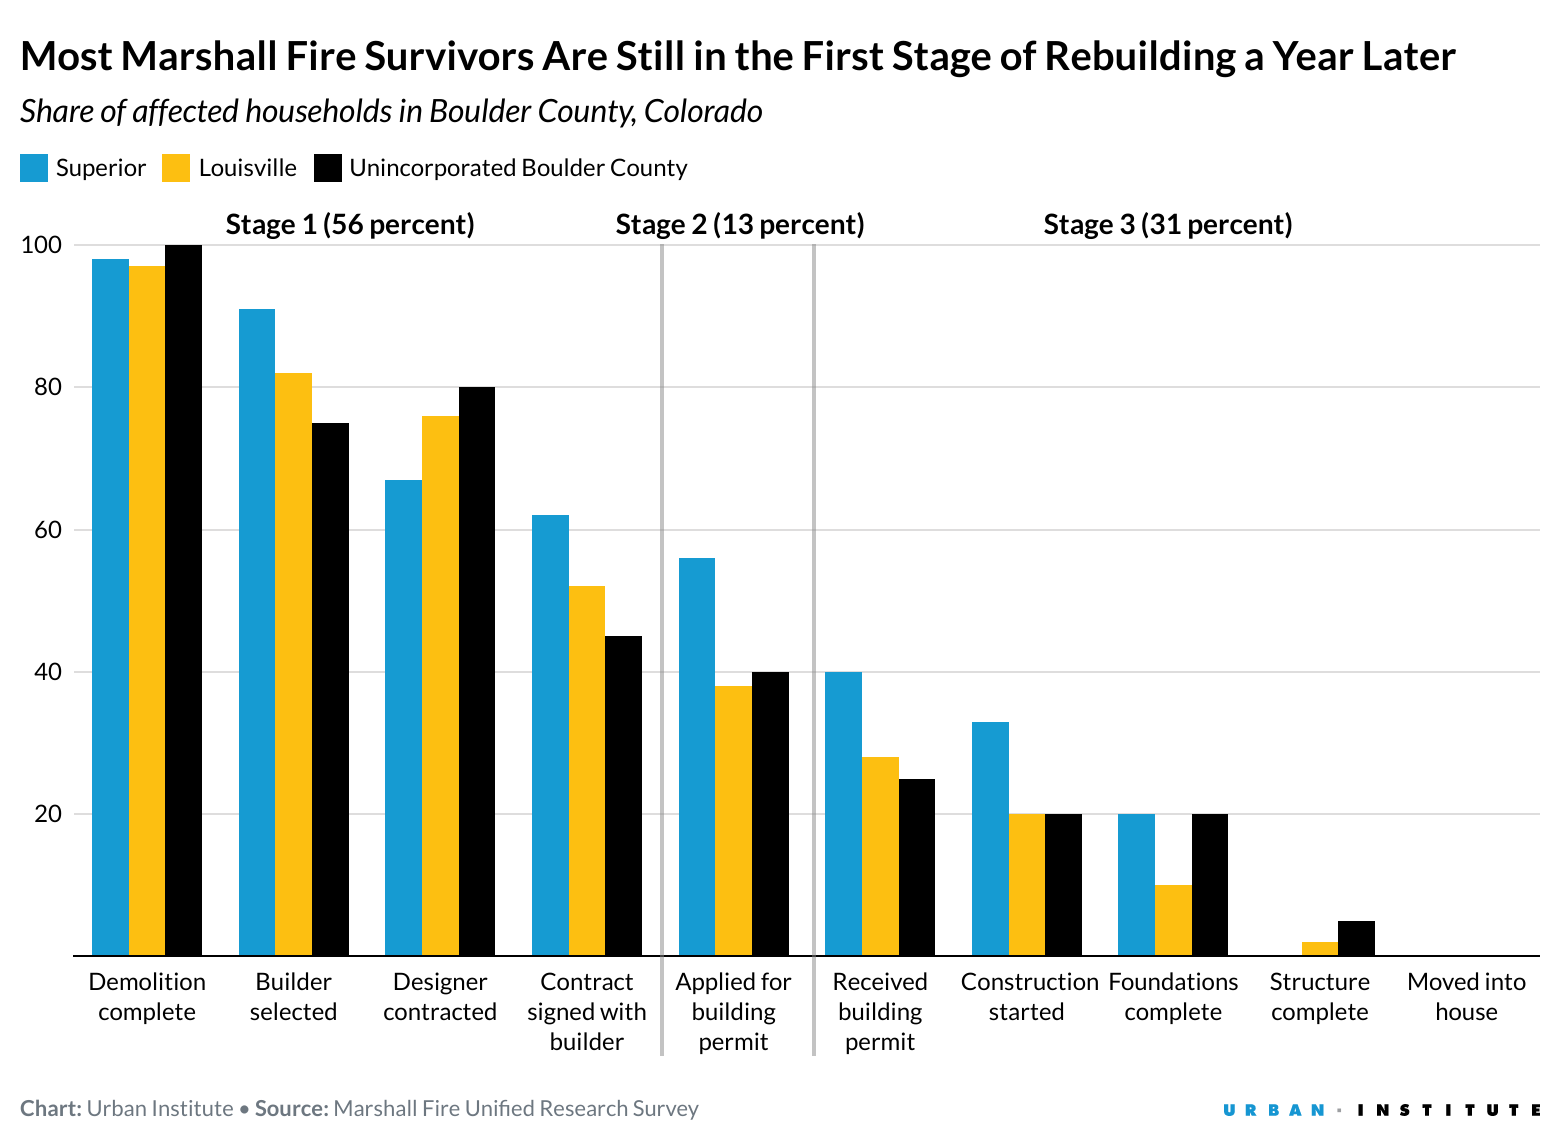 A comparison graph of affected households in Boulder County, Colorado. 56% are still in stage 1 of recovery. 31% are in the final stage